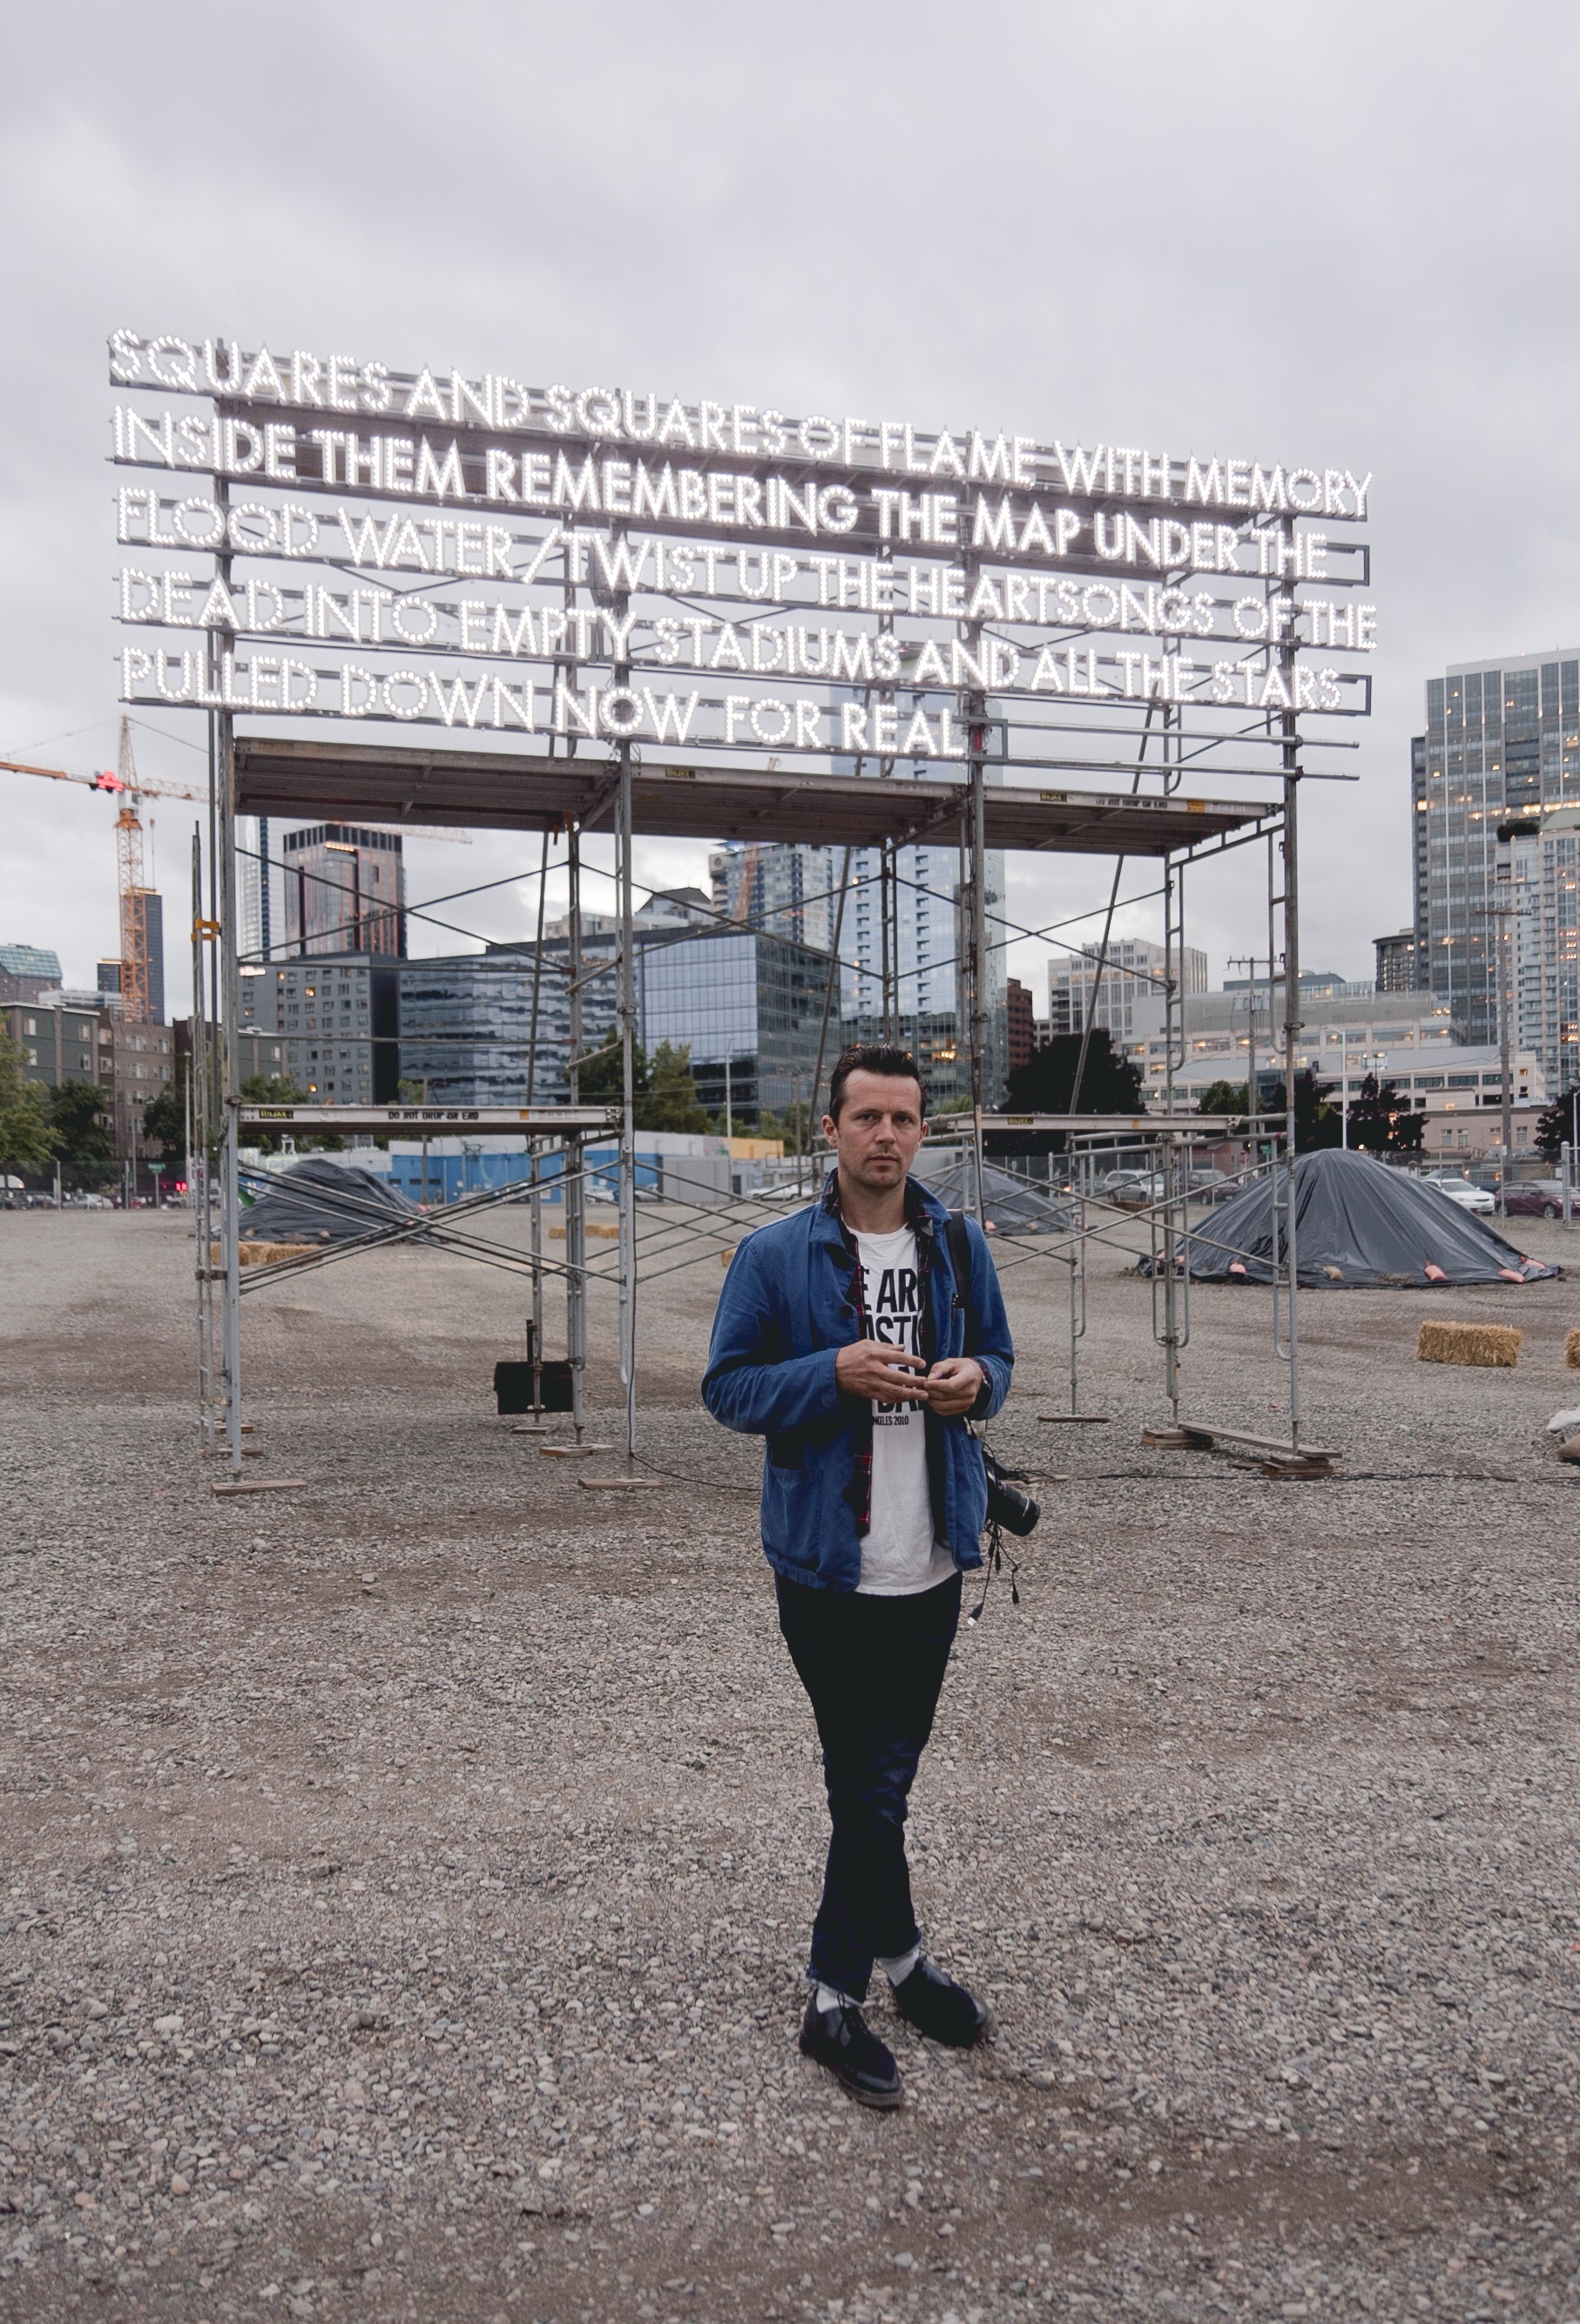 A person stands in front of a work of billboard installation art with a skyline looming in the background